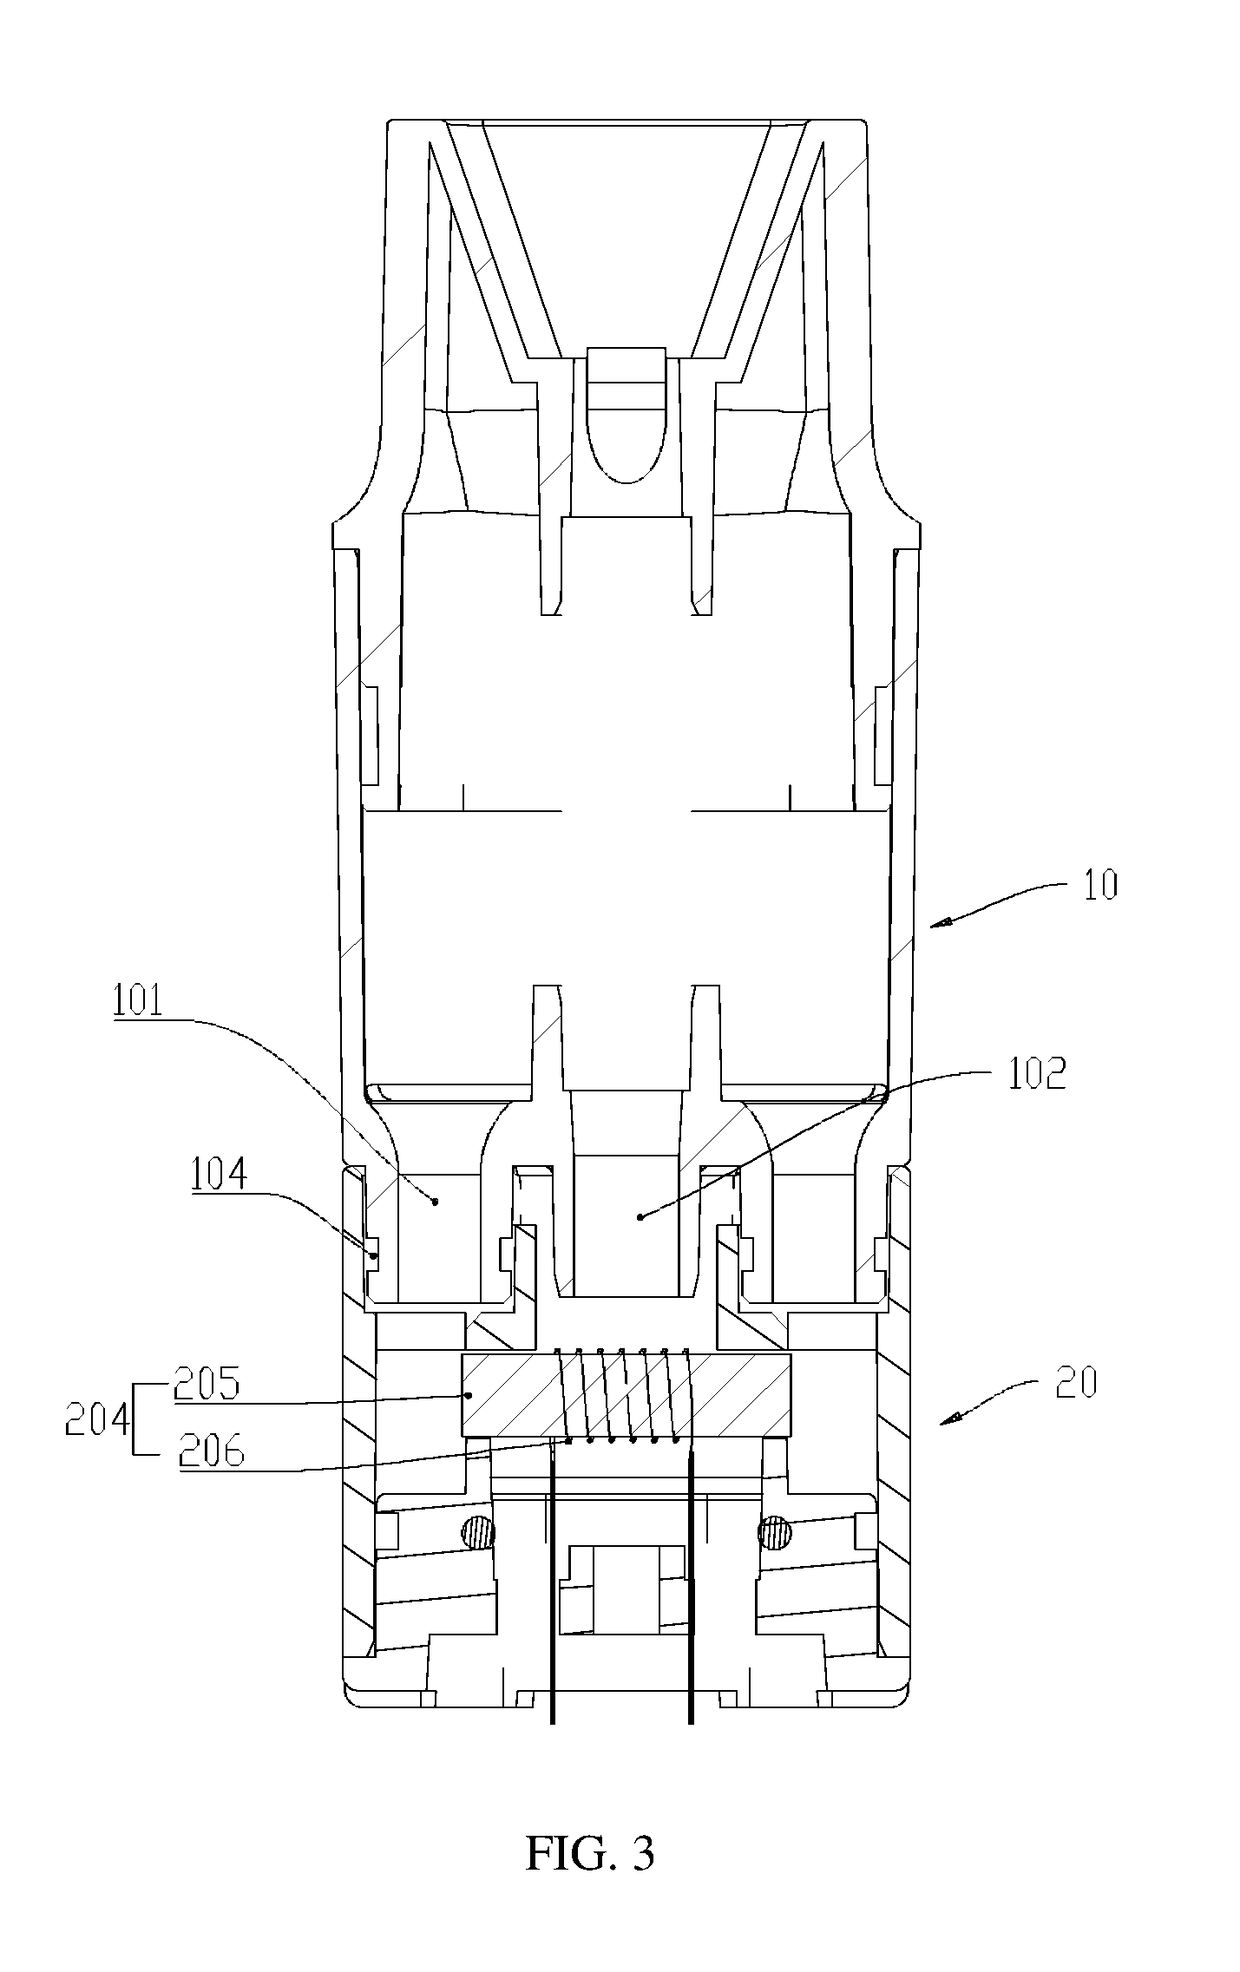 Atomizer compartment structure